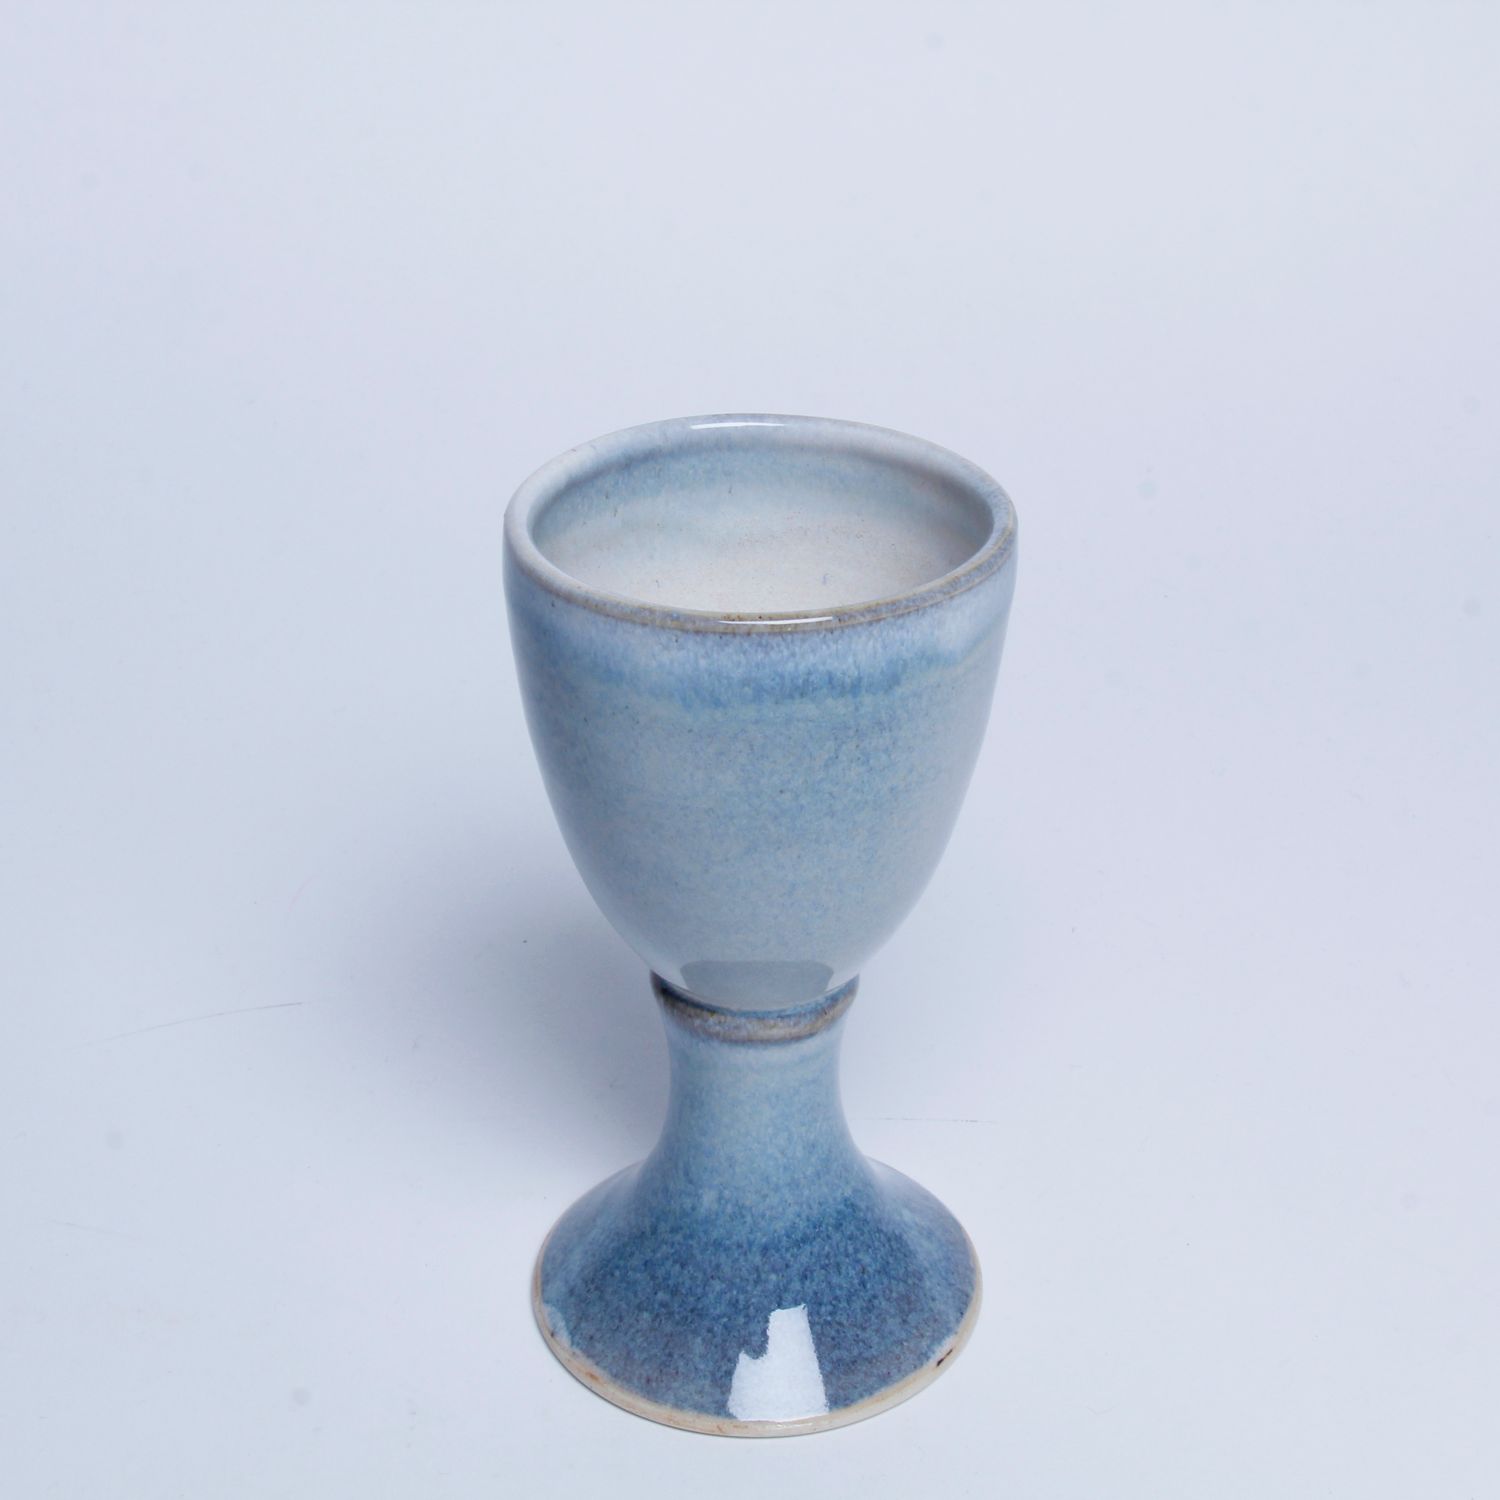 Teresa Dunlop: Goblet (Each sold separately) Product Image 3 of 3